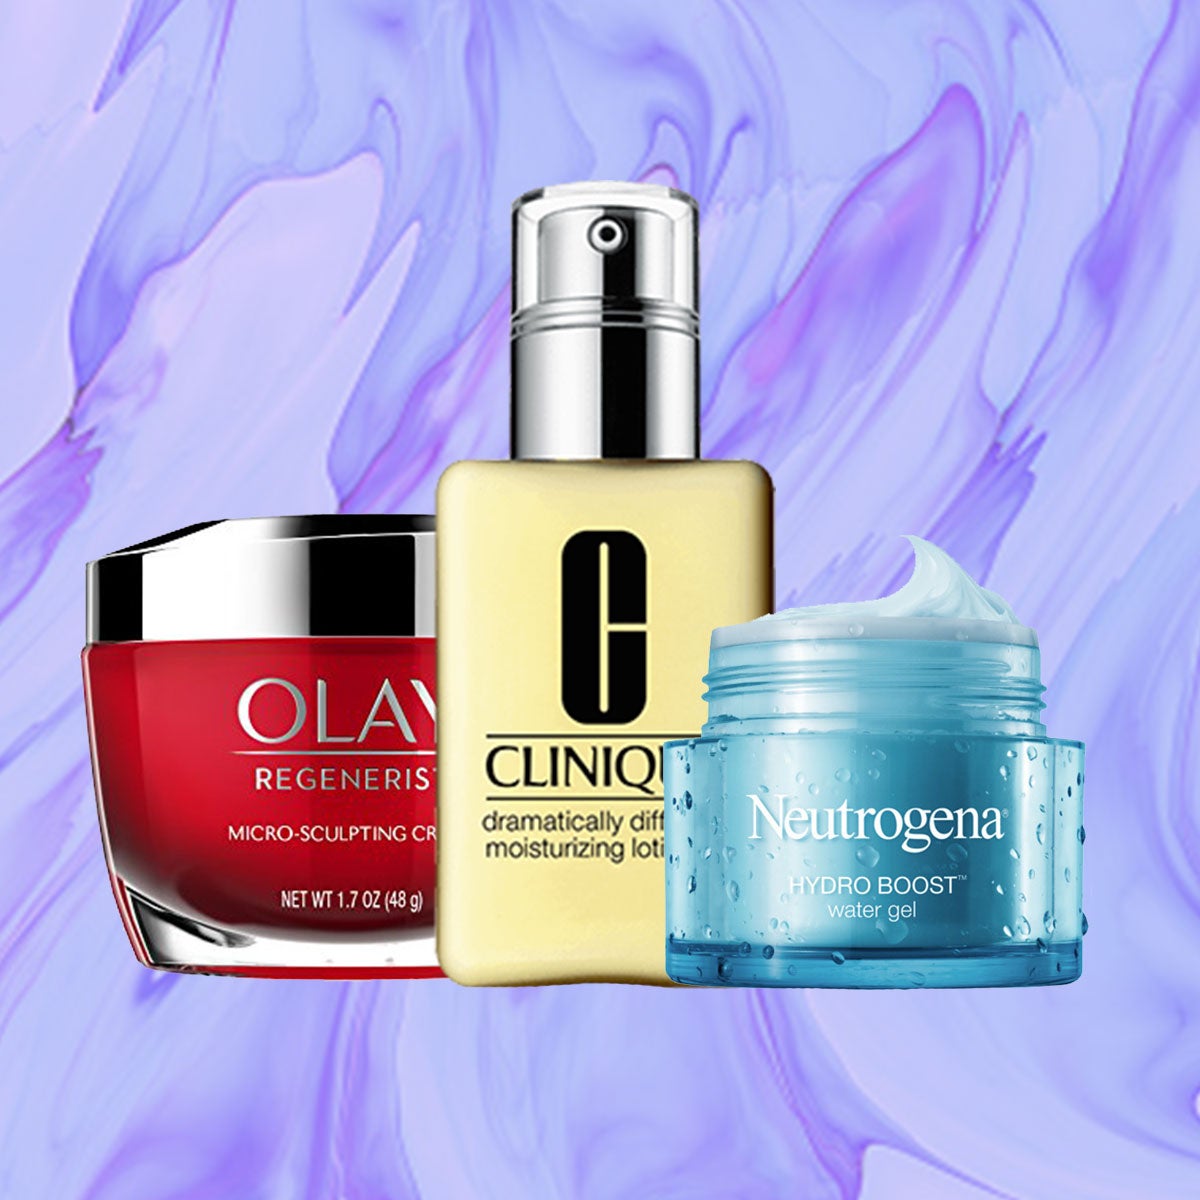 Transition Your Skin: All The Moisture You'll Need To Bring Your Skin To Life This Fall